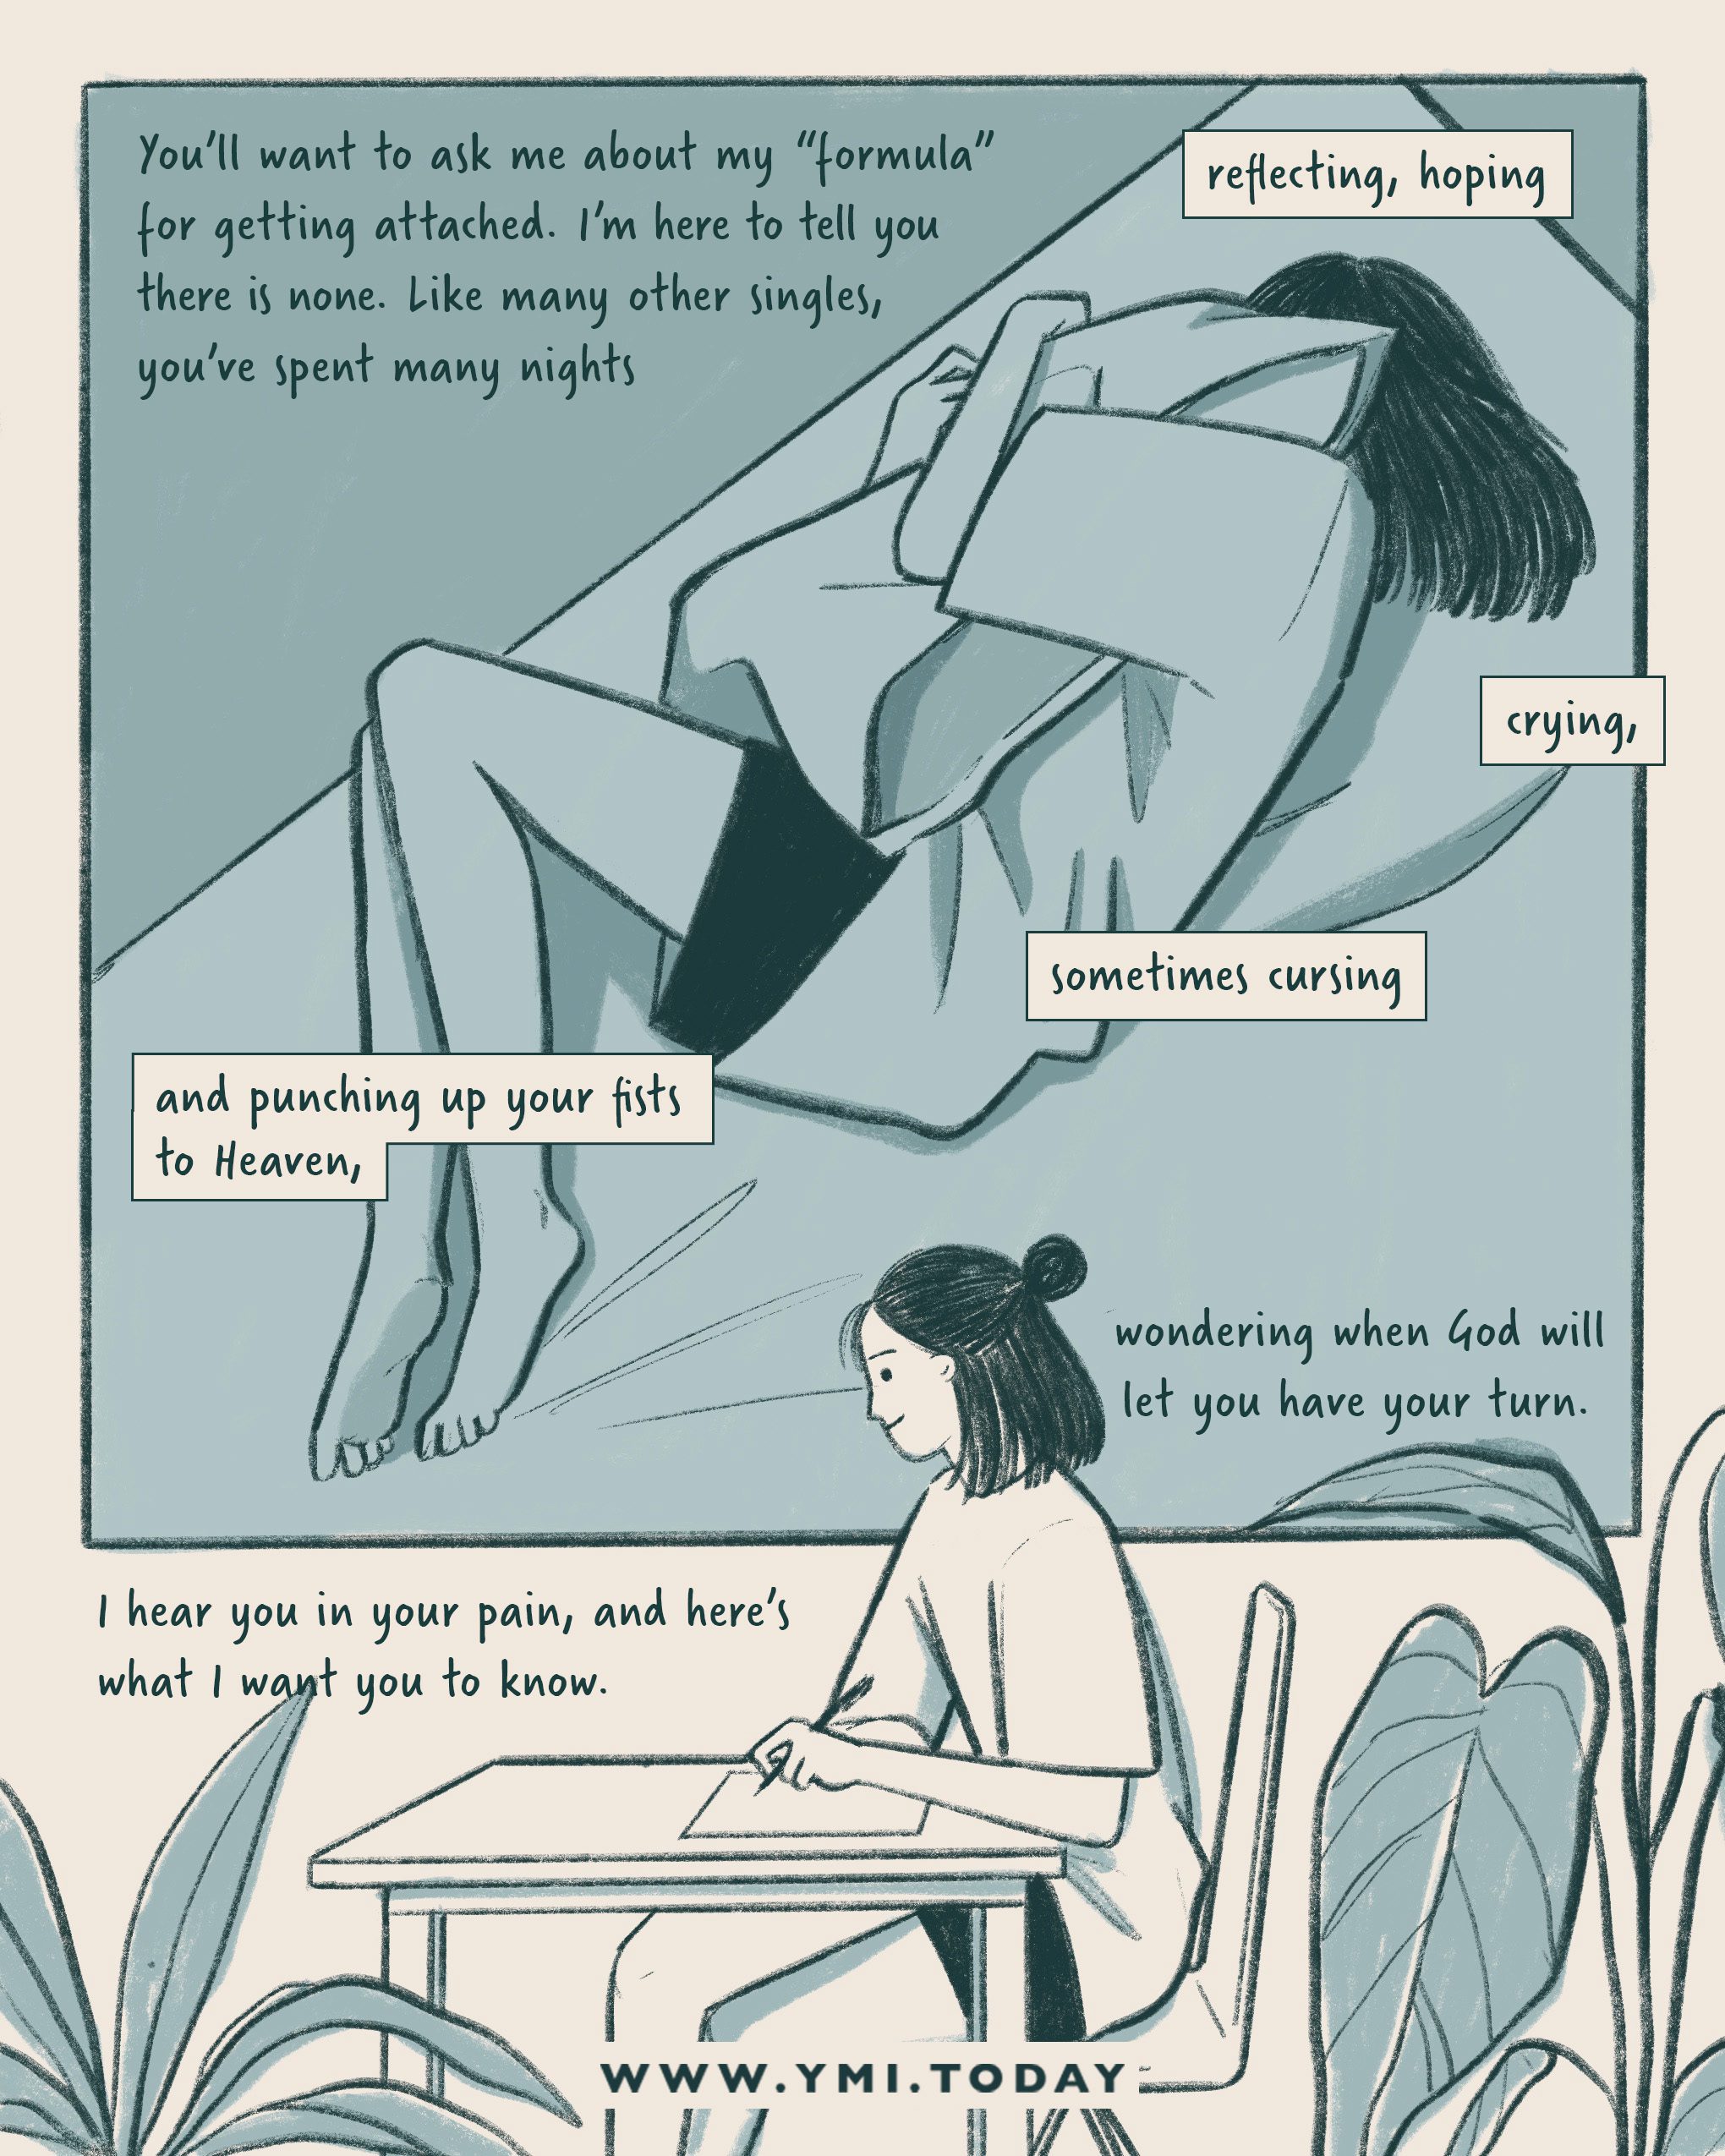 Girl writing letter to her old self, shown curled up in bed.